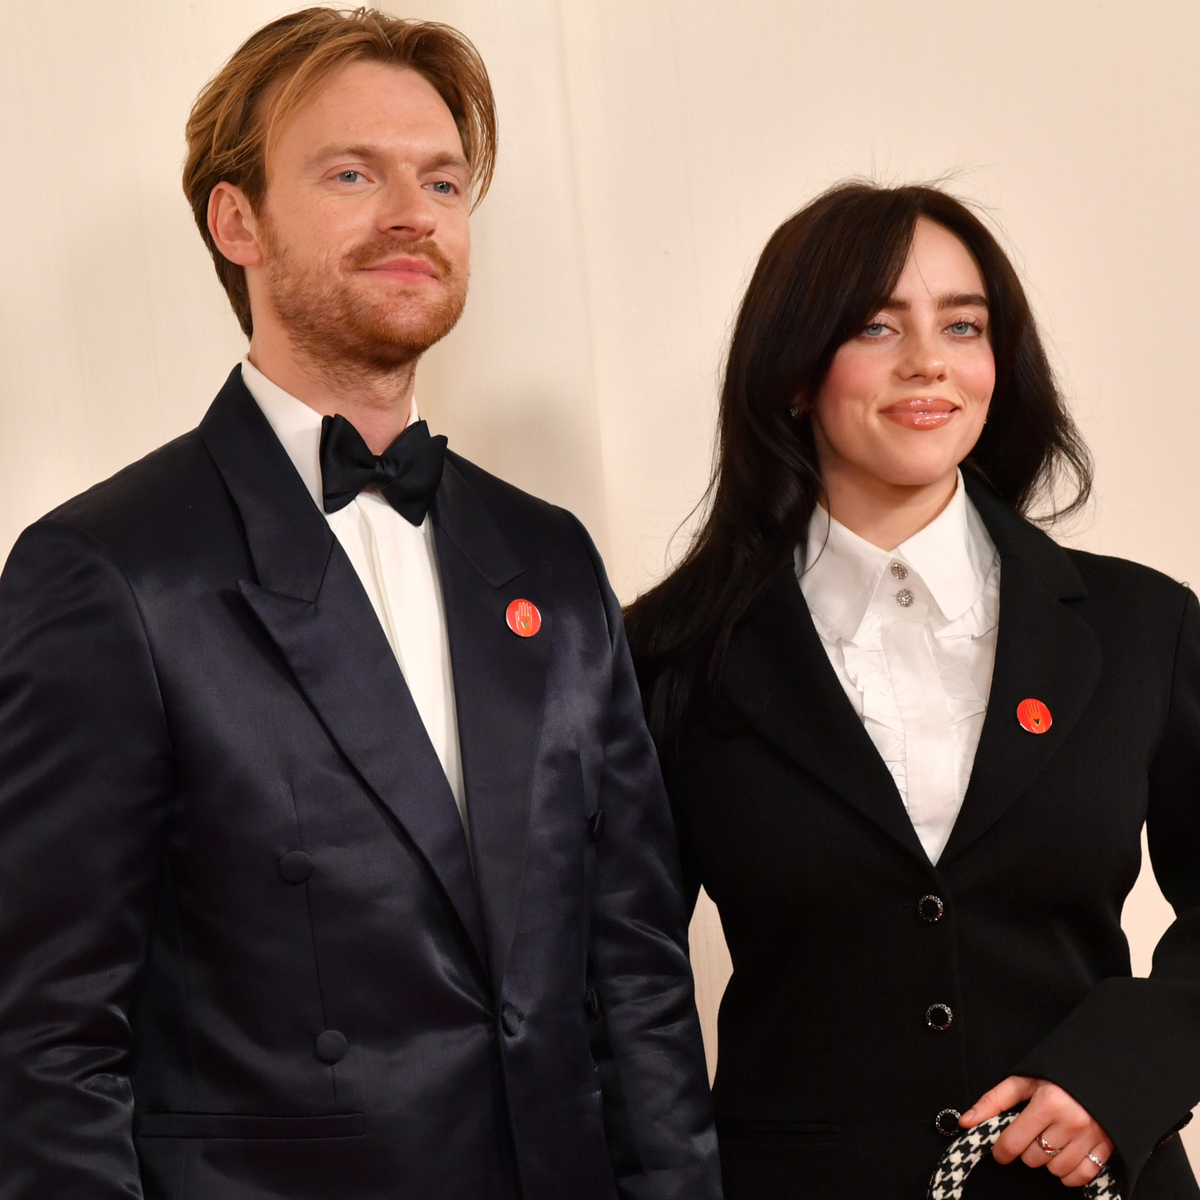 Billie Eilish and Finneas Break 86-Year Oscars Record With Best Original Song Win